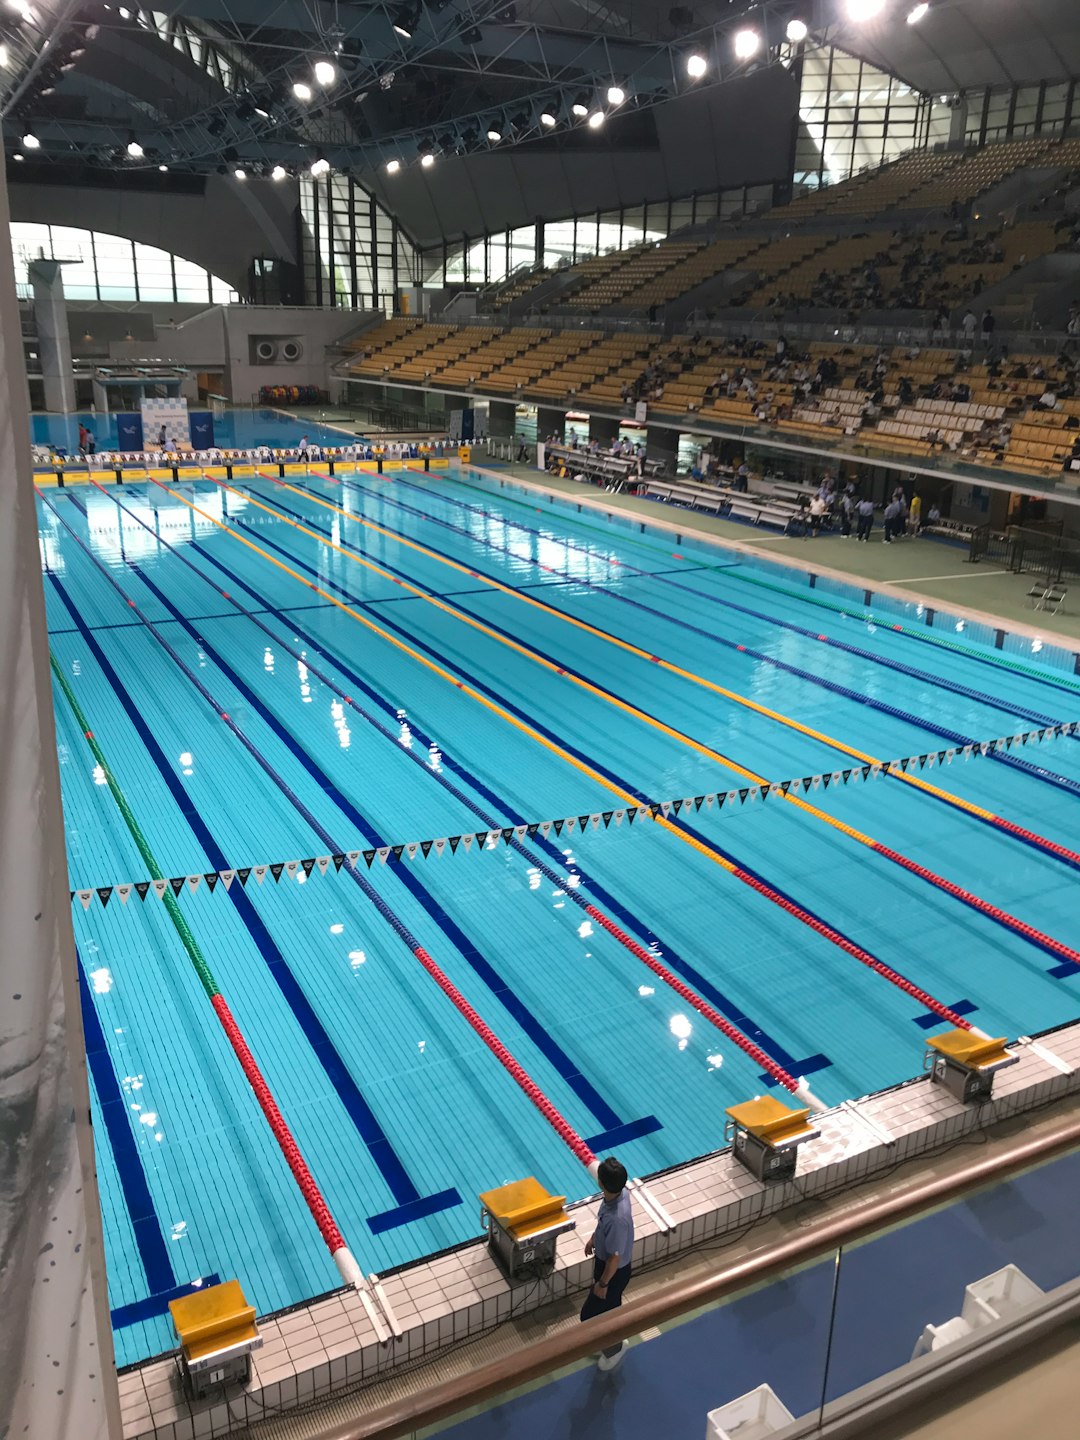 Travel Tips and Stories of Tokyo Tatsumi International Swimming Center in Japan